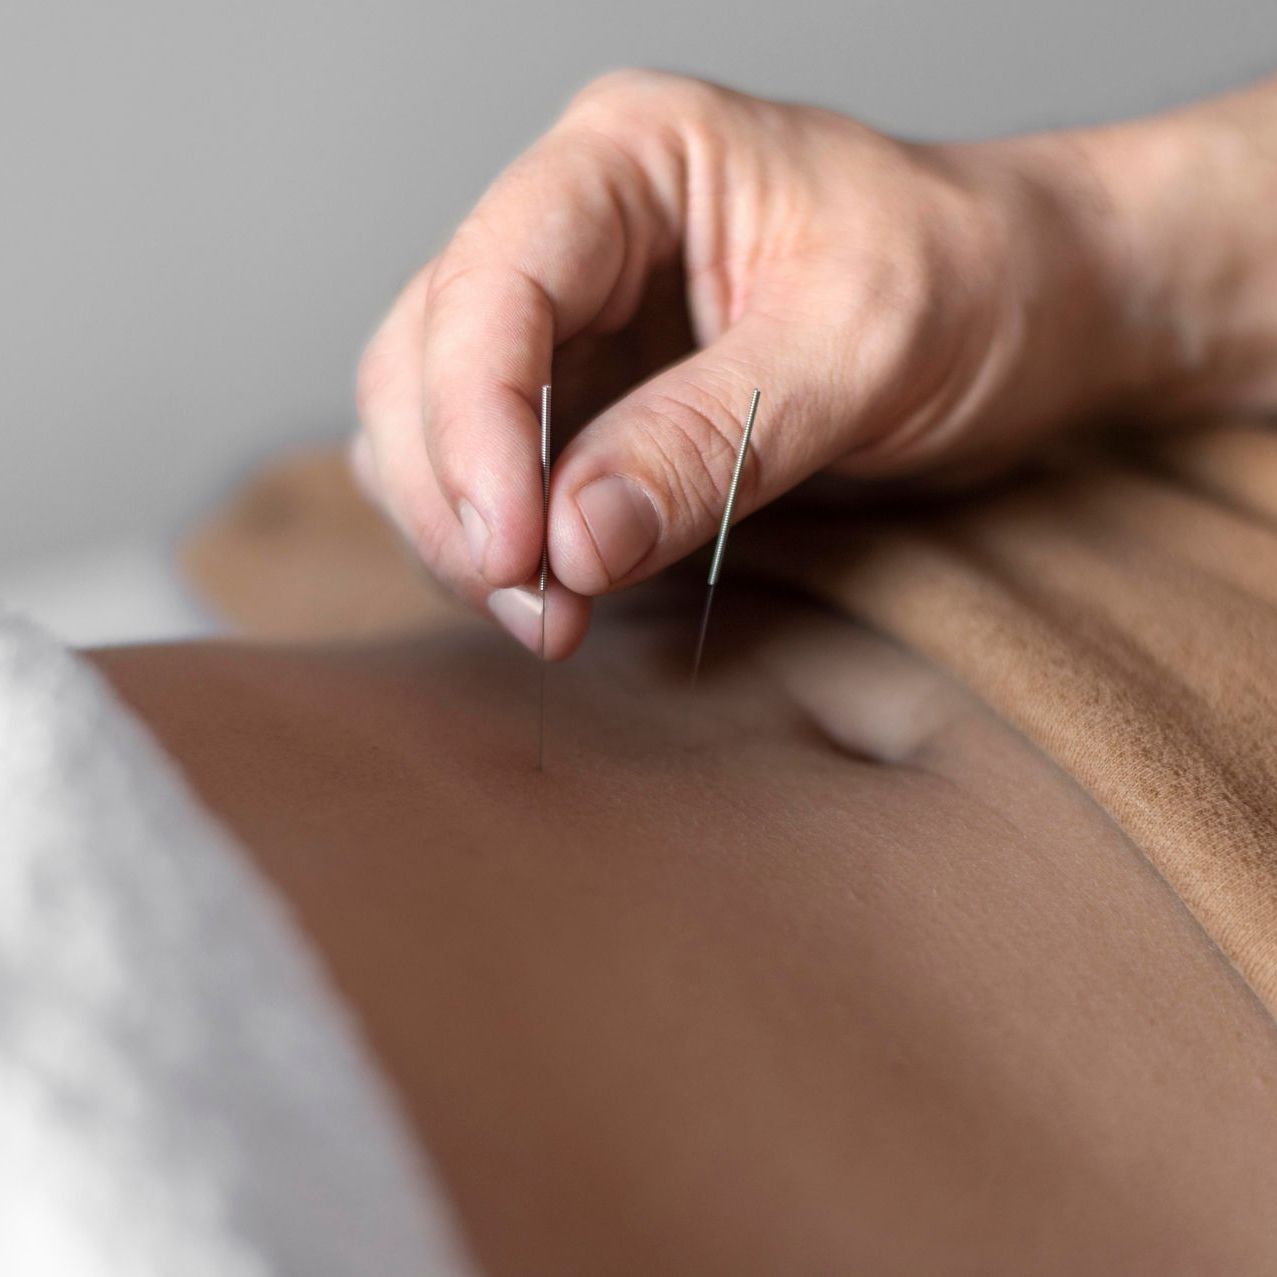 medical acupuncture on stomach